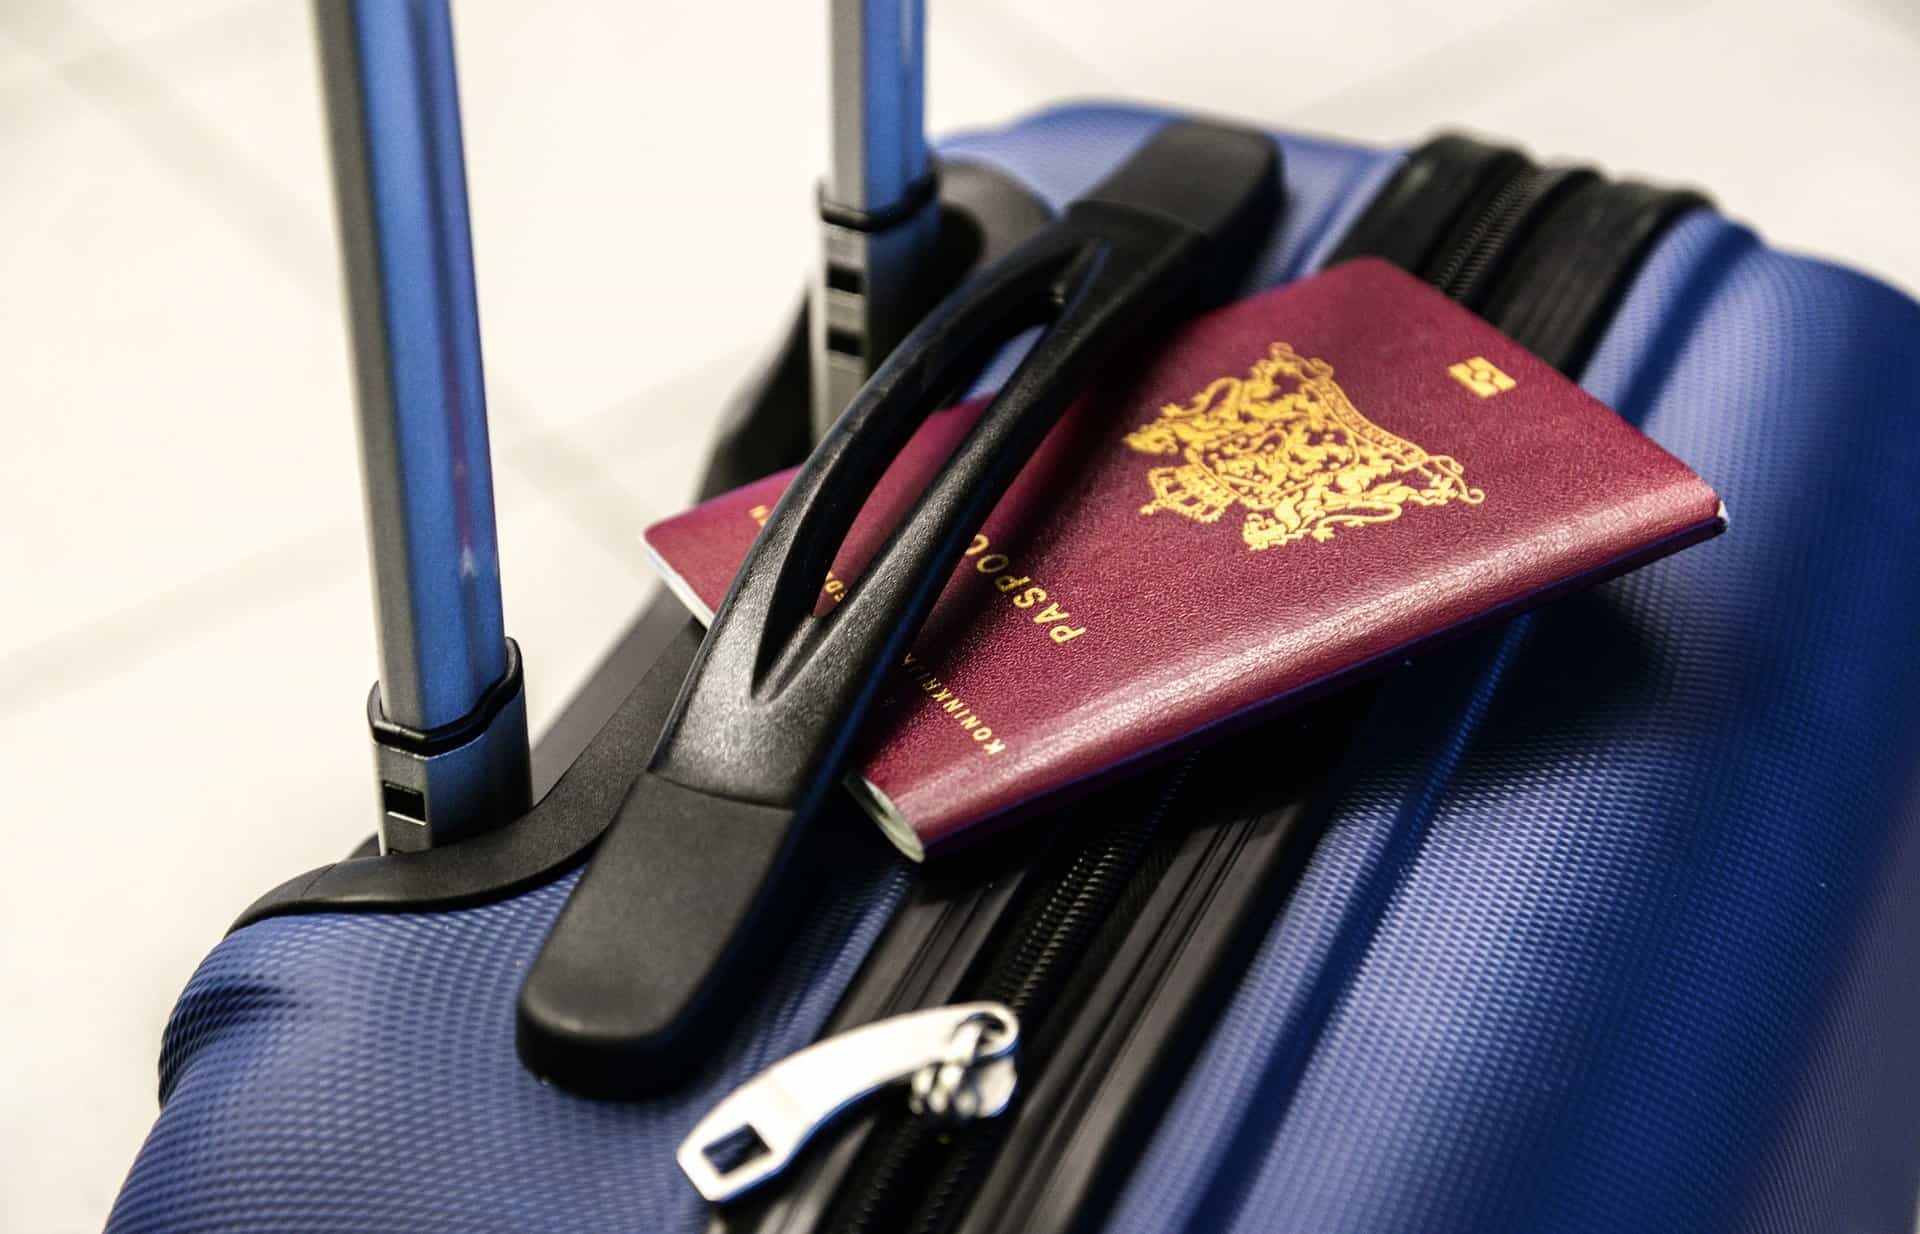 Dutch passport on top of a blue suitcase - make sure you have a current and valid passport before traveling